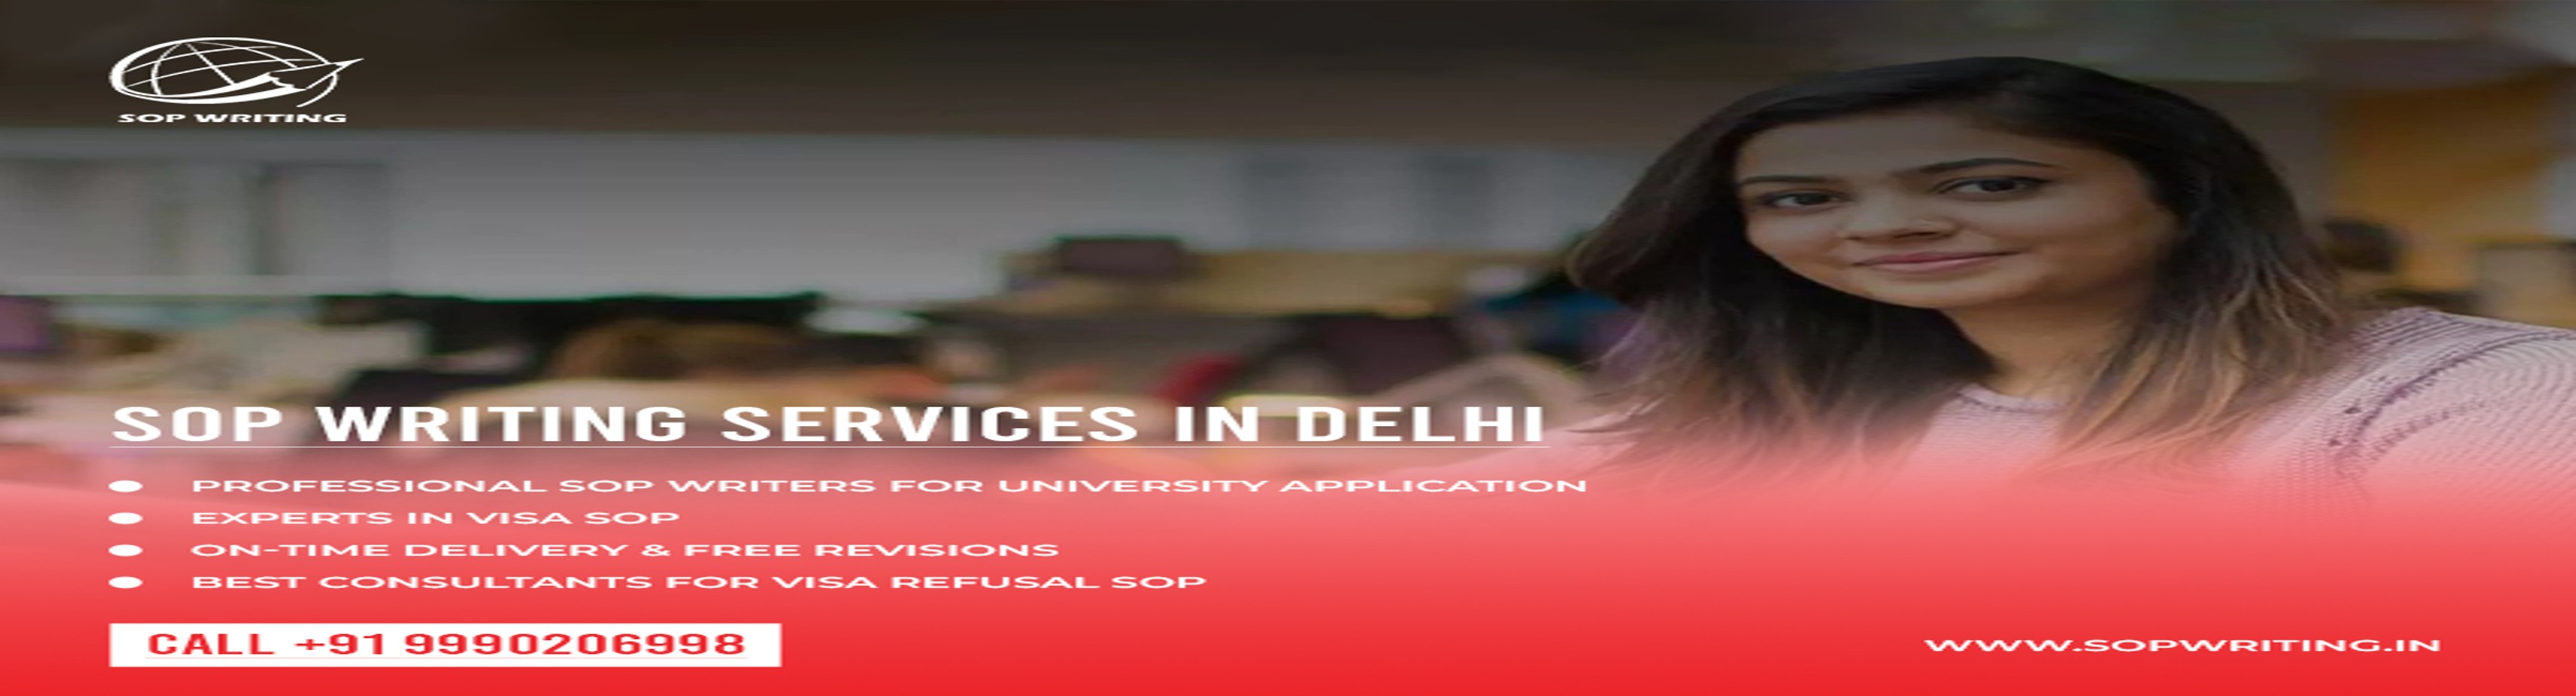 SOP Writing Services in Delhi, IndiaEducation and LearningCareer CounselingWest DelhiRajouri Garden